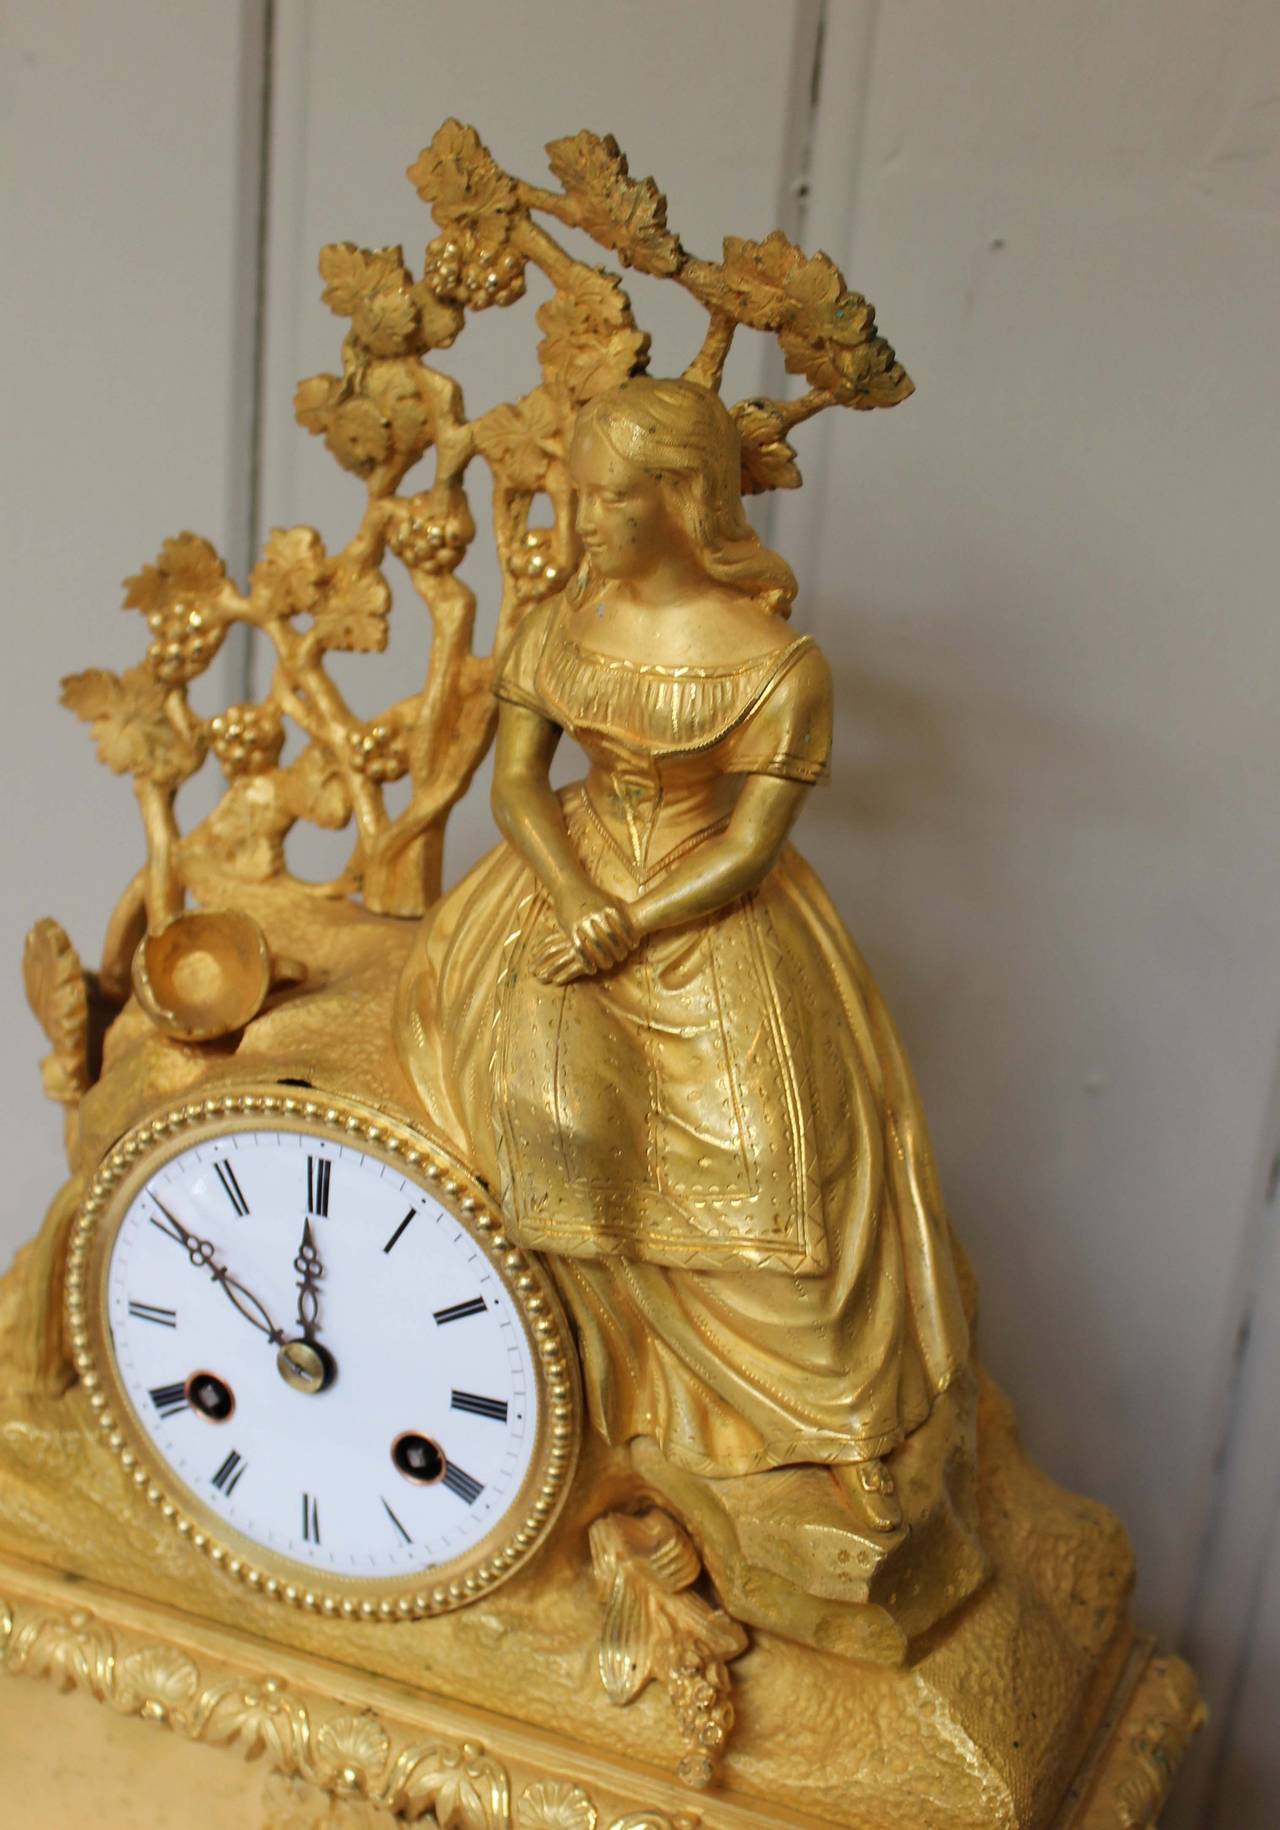 A good quality French mantel clock. It has a heavy gilt ormolu case depicting a classical scene of a maiden with a broken water pail. Below, in the cartouche, is a scene depicting the same maiden filling her water pail. It has an eight day bell